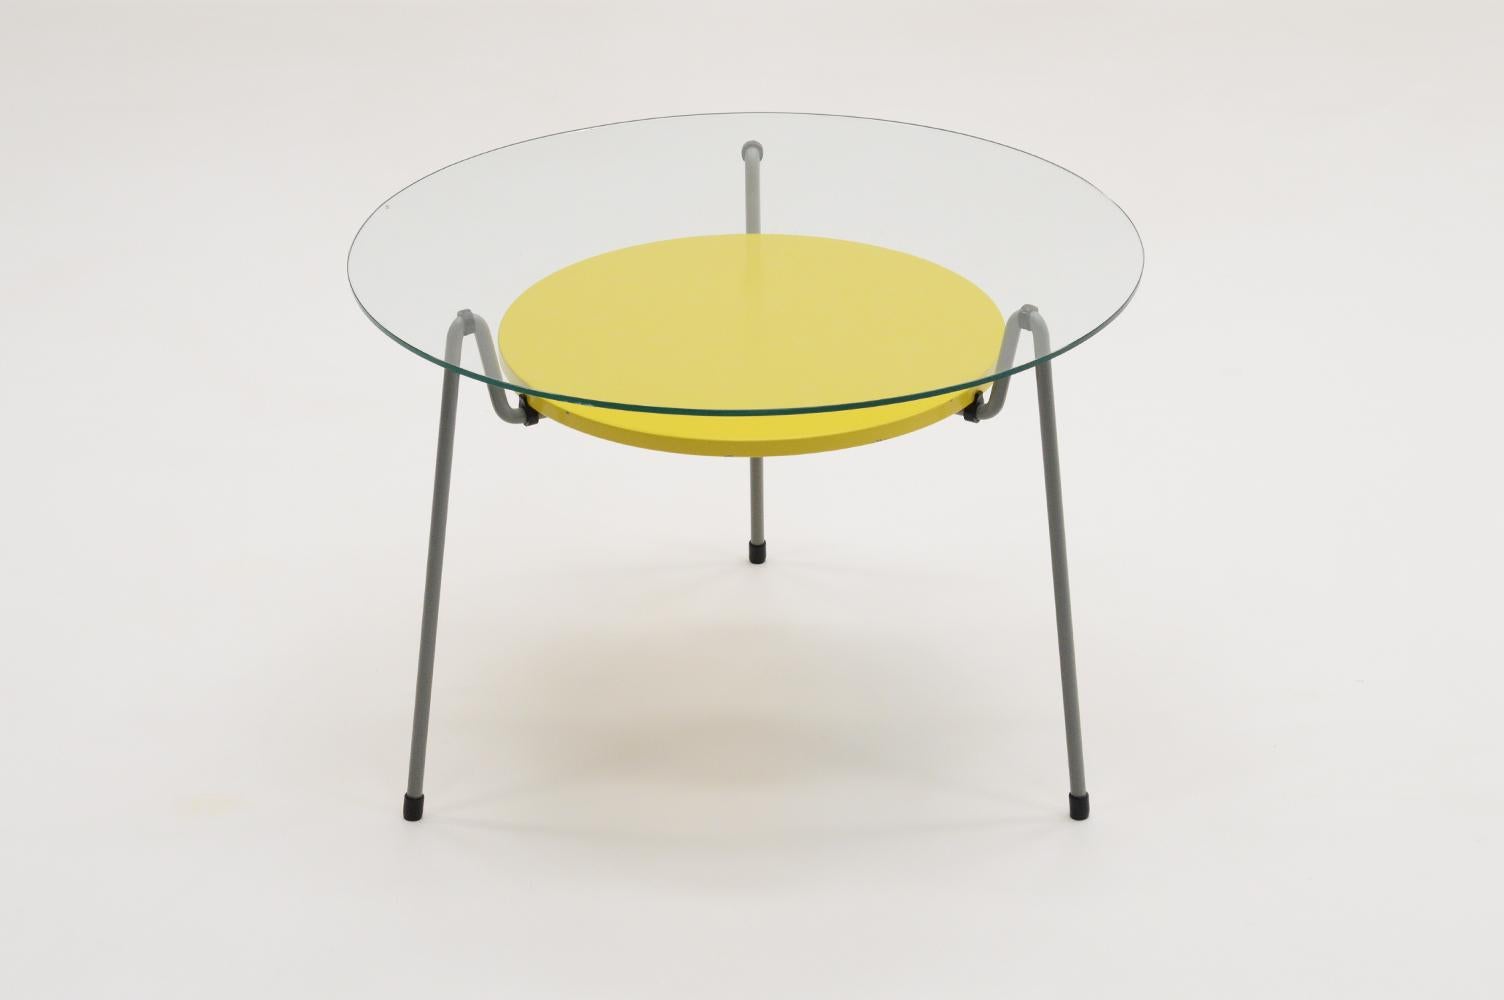 Mid-Century Modern 535 table by Wim Rietveld for Gispen, The Netherlands 50s.